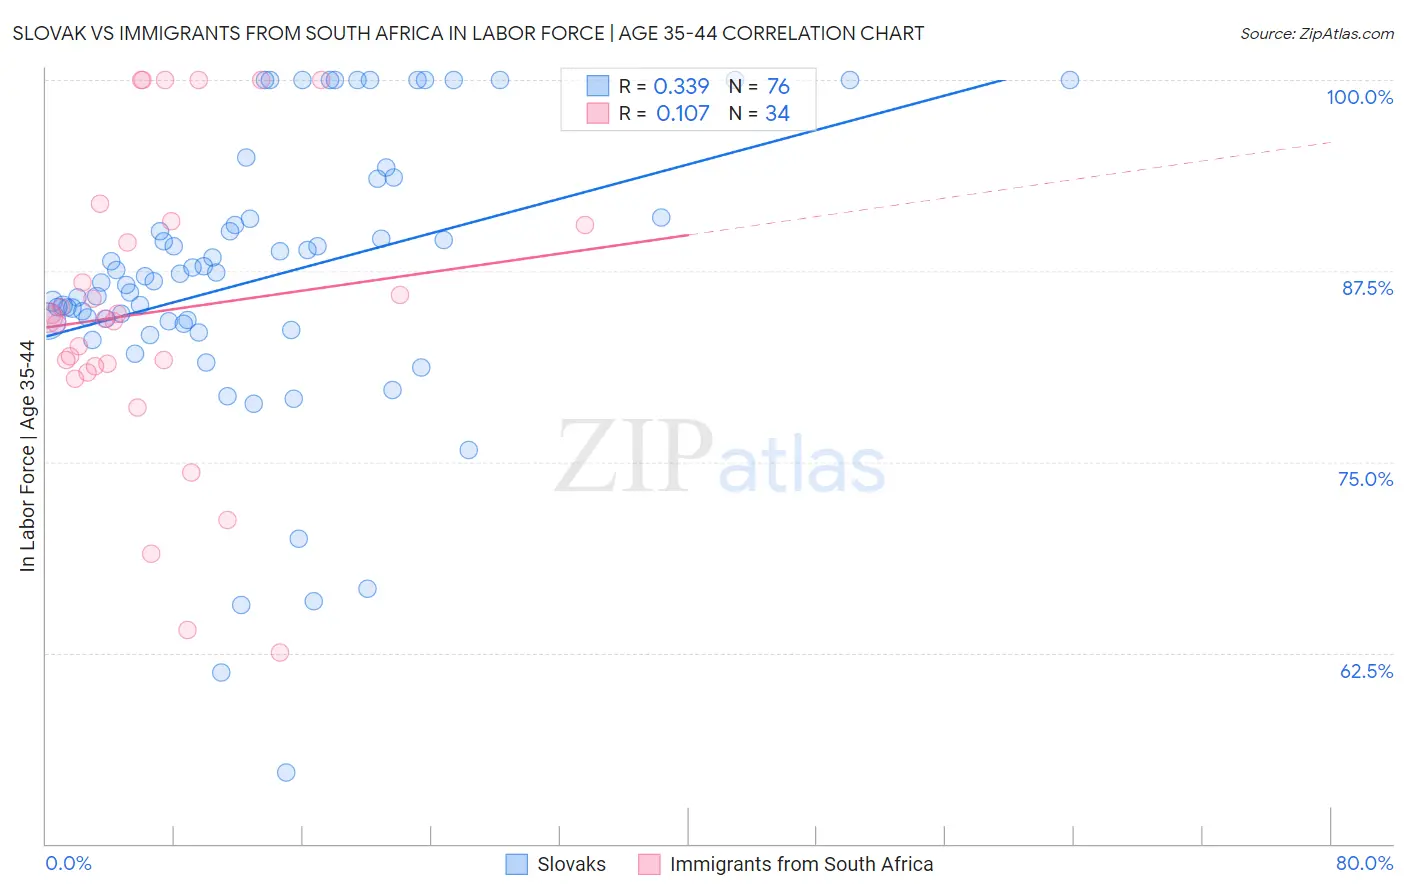 Slovak vs Immigrants from South Africa In Labor Force | Age 35-44